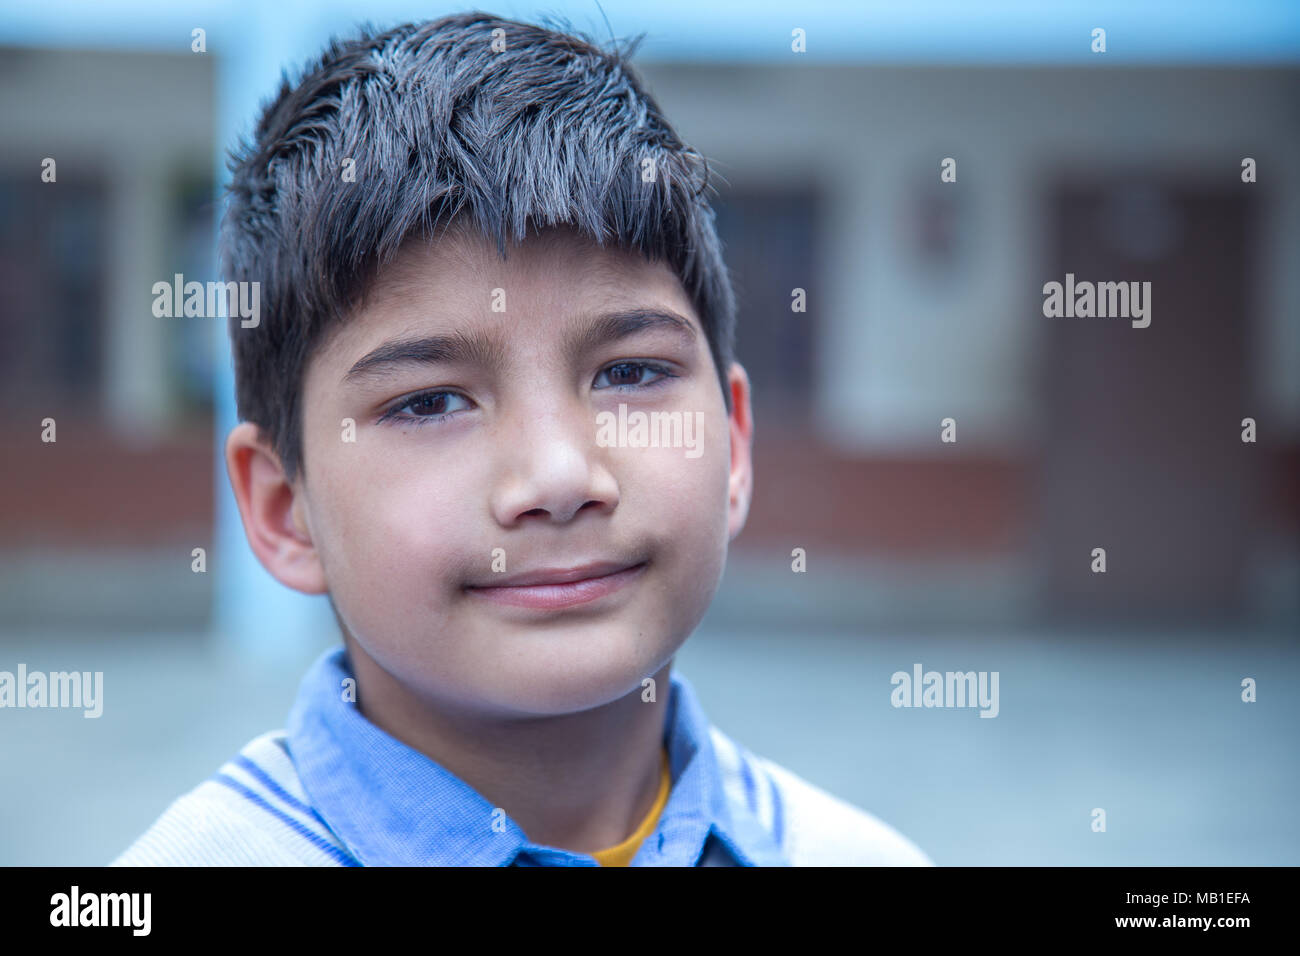 Closeup portrait of smiling 8-9 years Indian kid, standing straight at school campus in school uniform and looking at camera Stock Photo